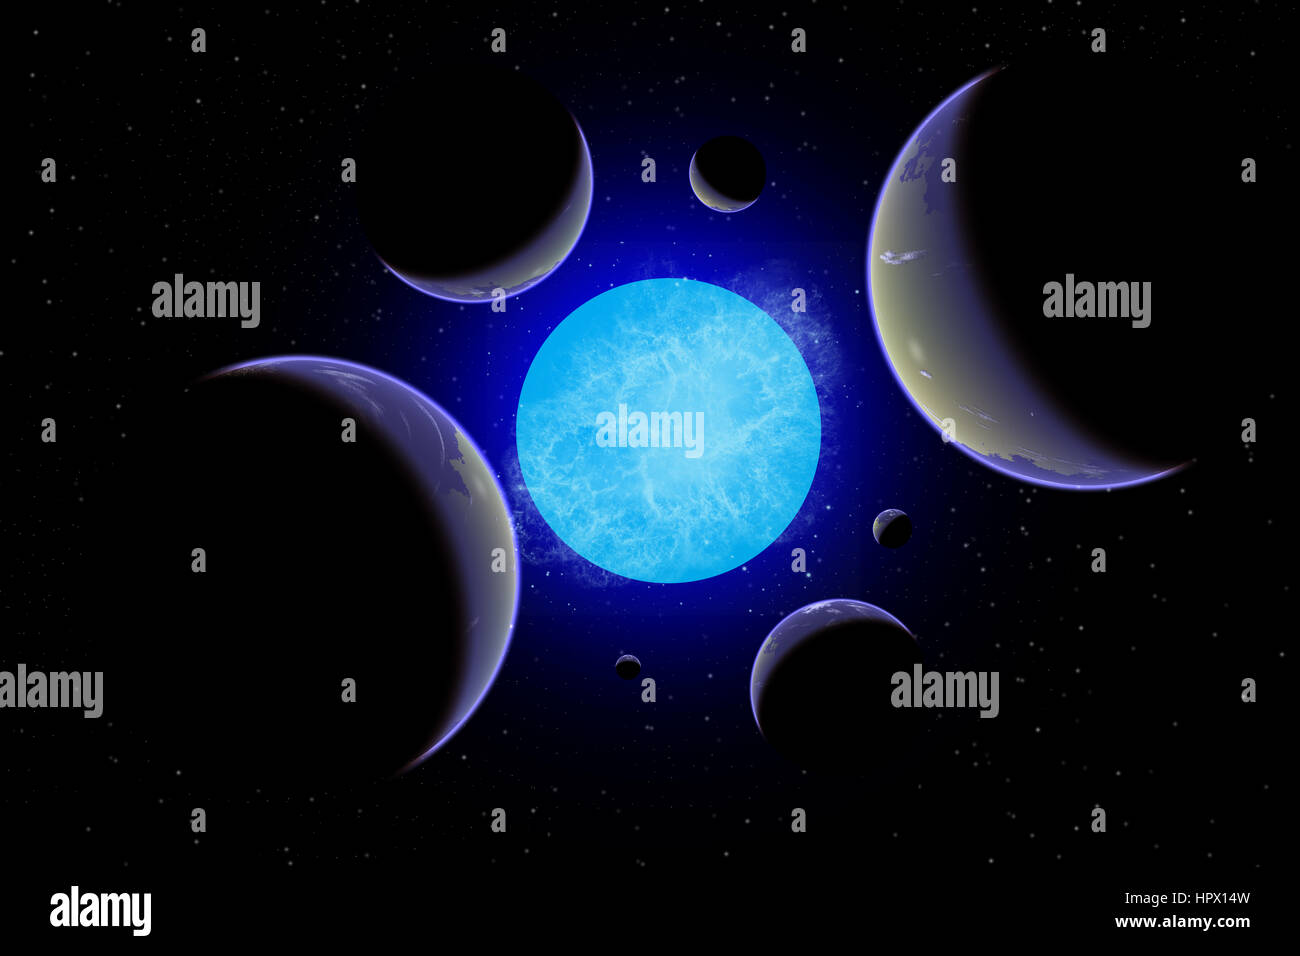 Newly Discovered Exo Planets In Orbit Around A Star. Stock Photo